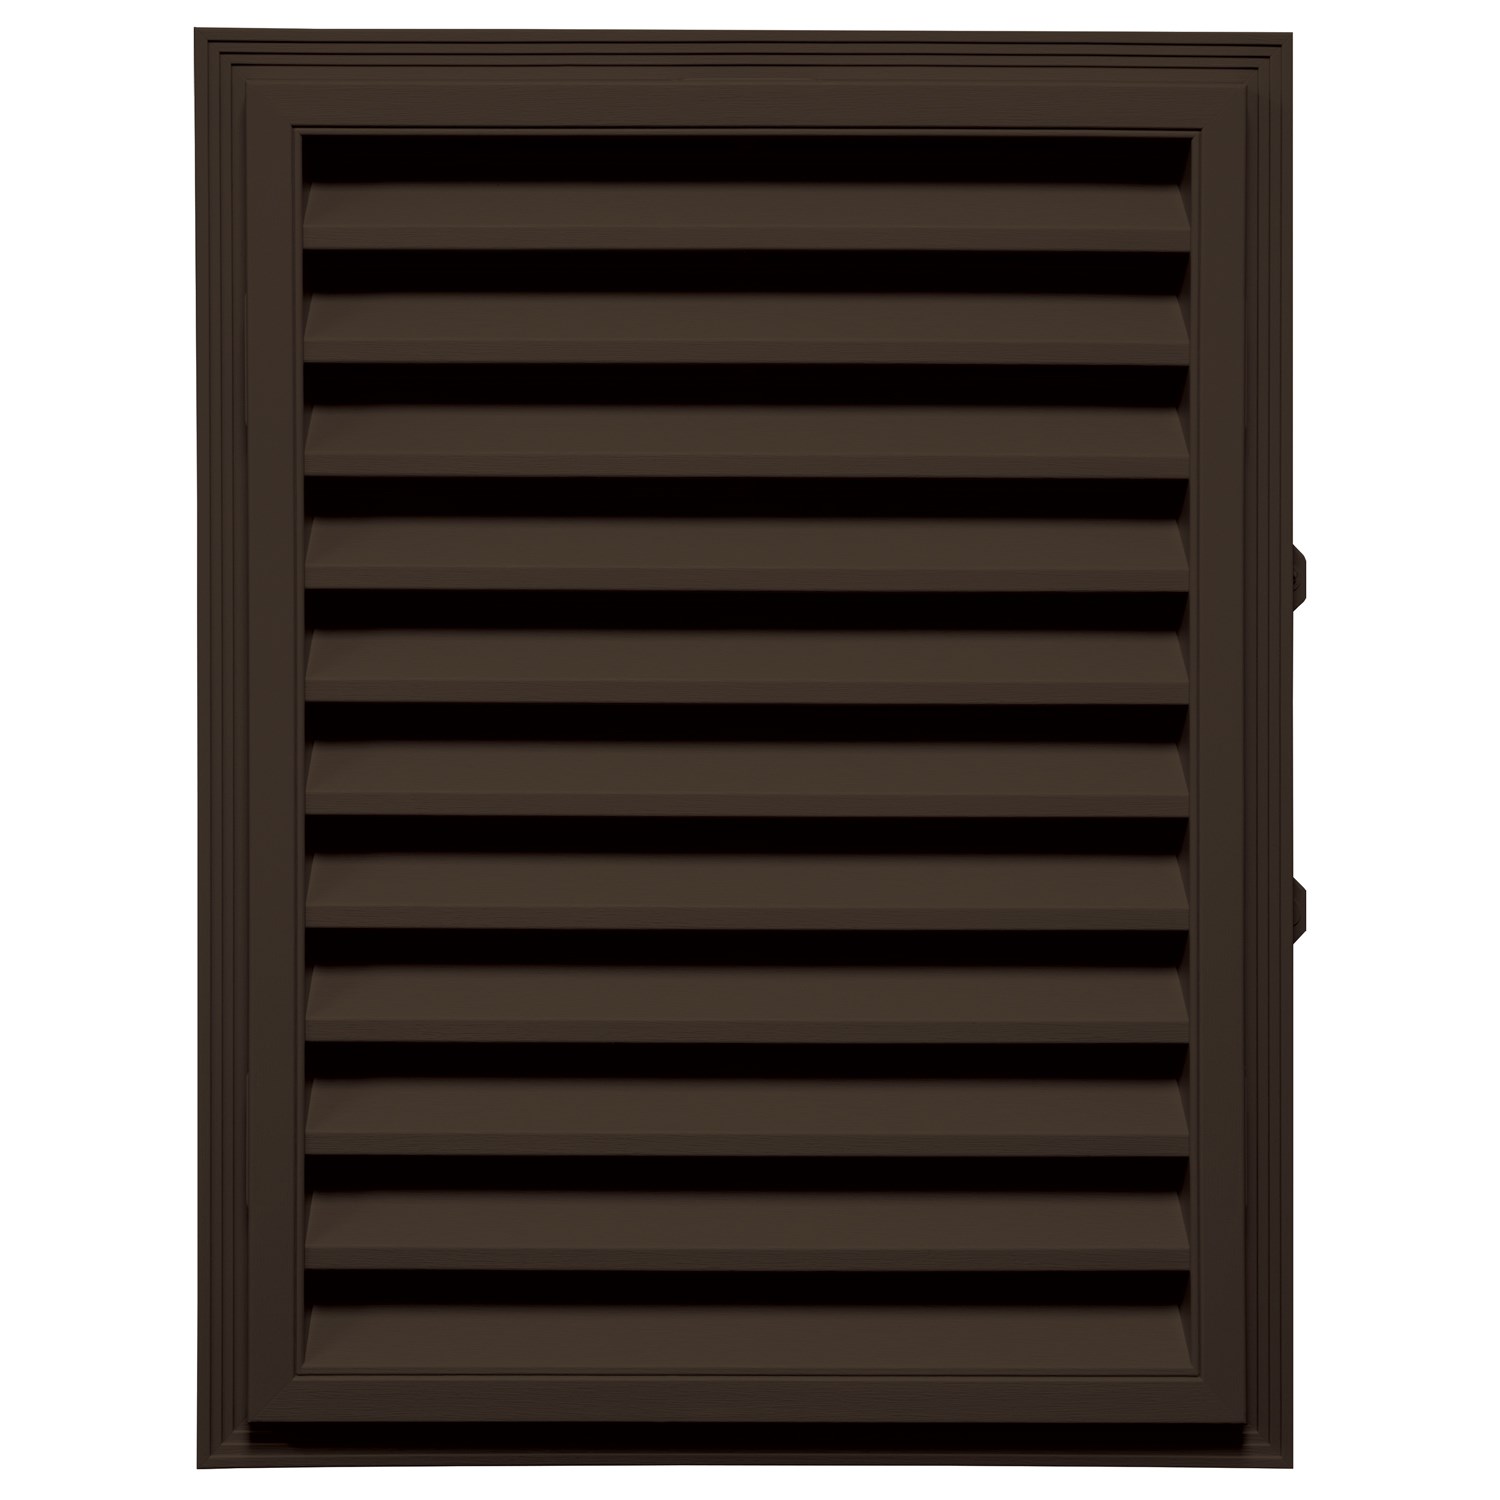 Product 18in. x 24in. - 336 Coffee Bean